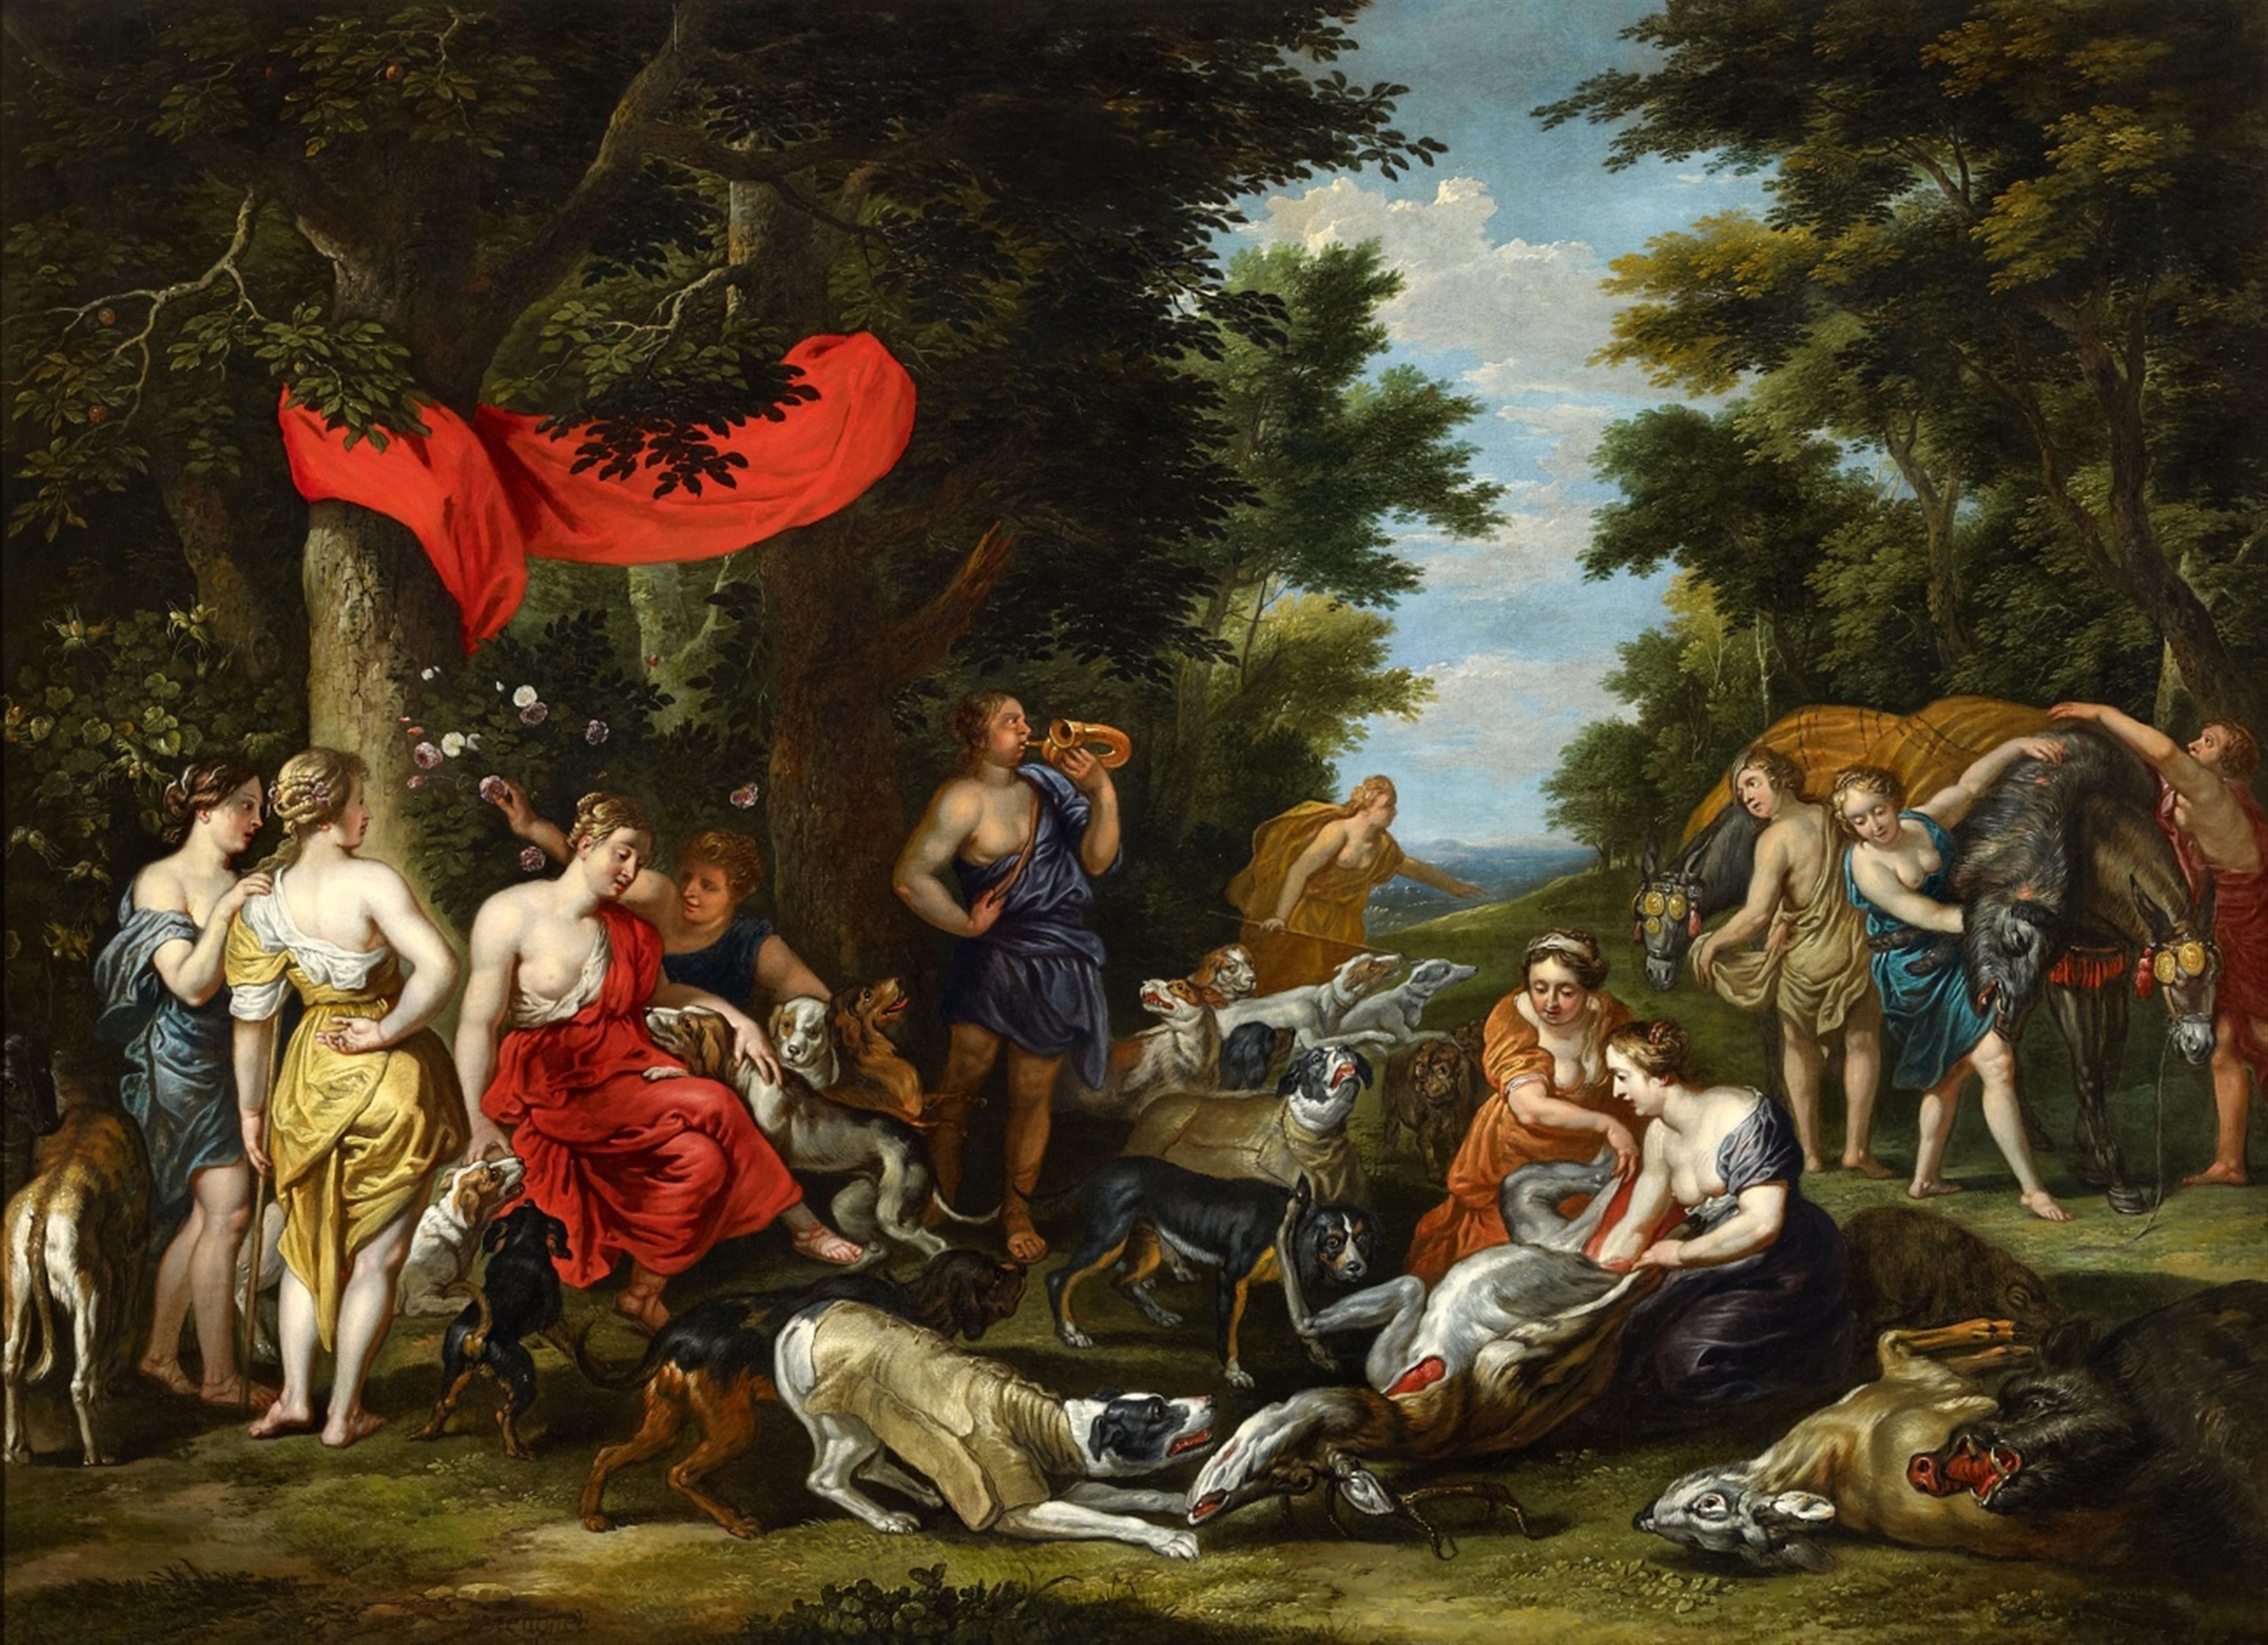 Peter Paul Rubens, studio of
Jan Brueghel the Younger - Diana and her Retinue after the Hunt - image-1